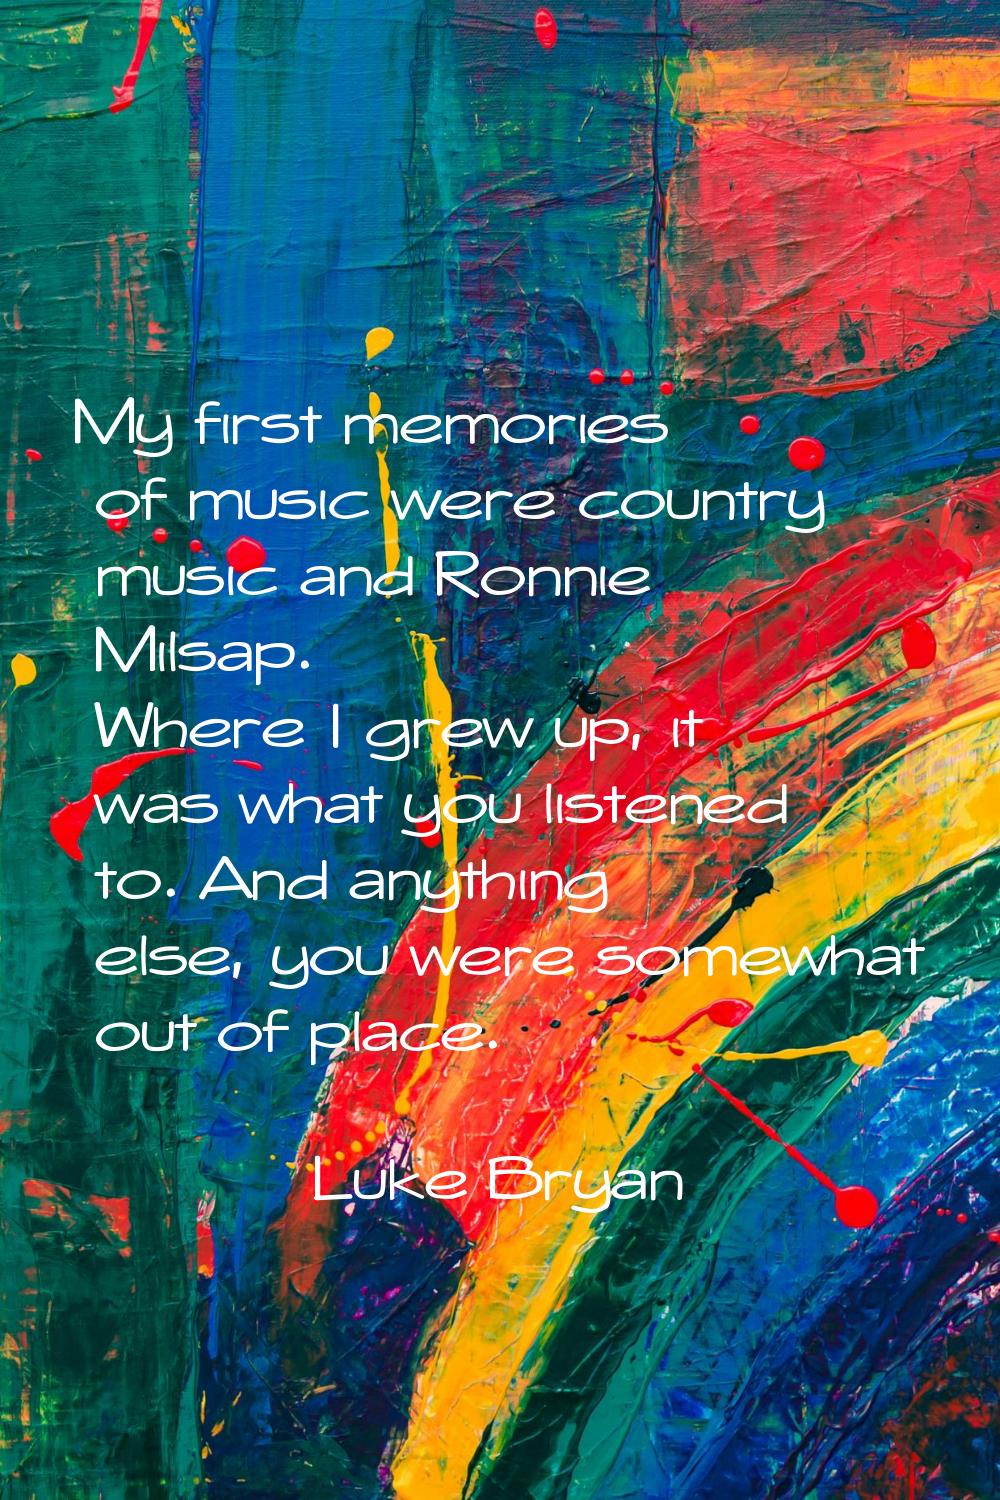 My first memories of music were country music and Ronnie Milsap. Where I grew up, it was what you l